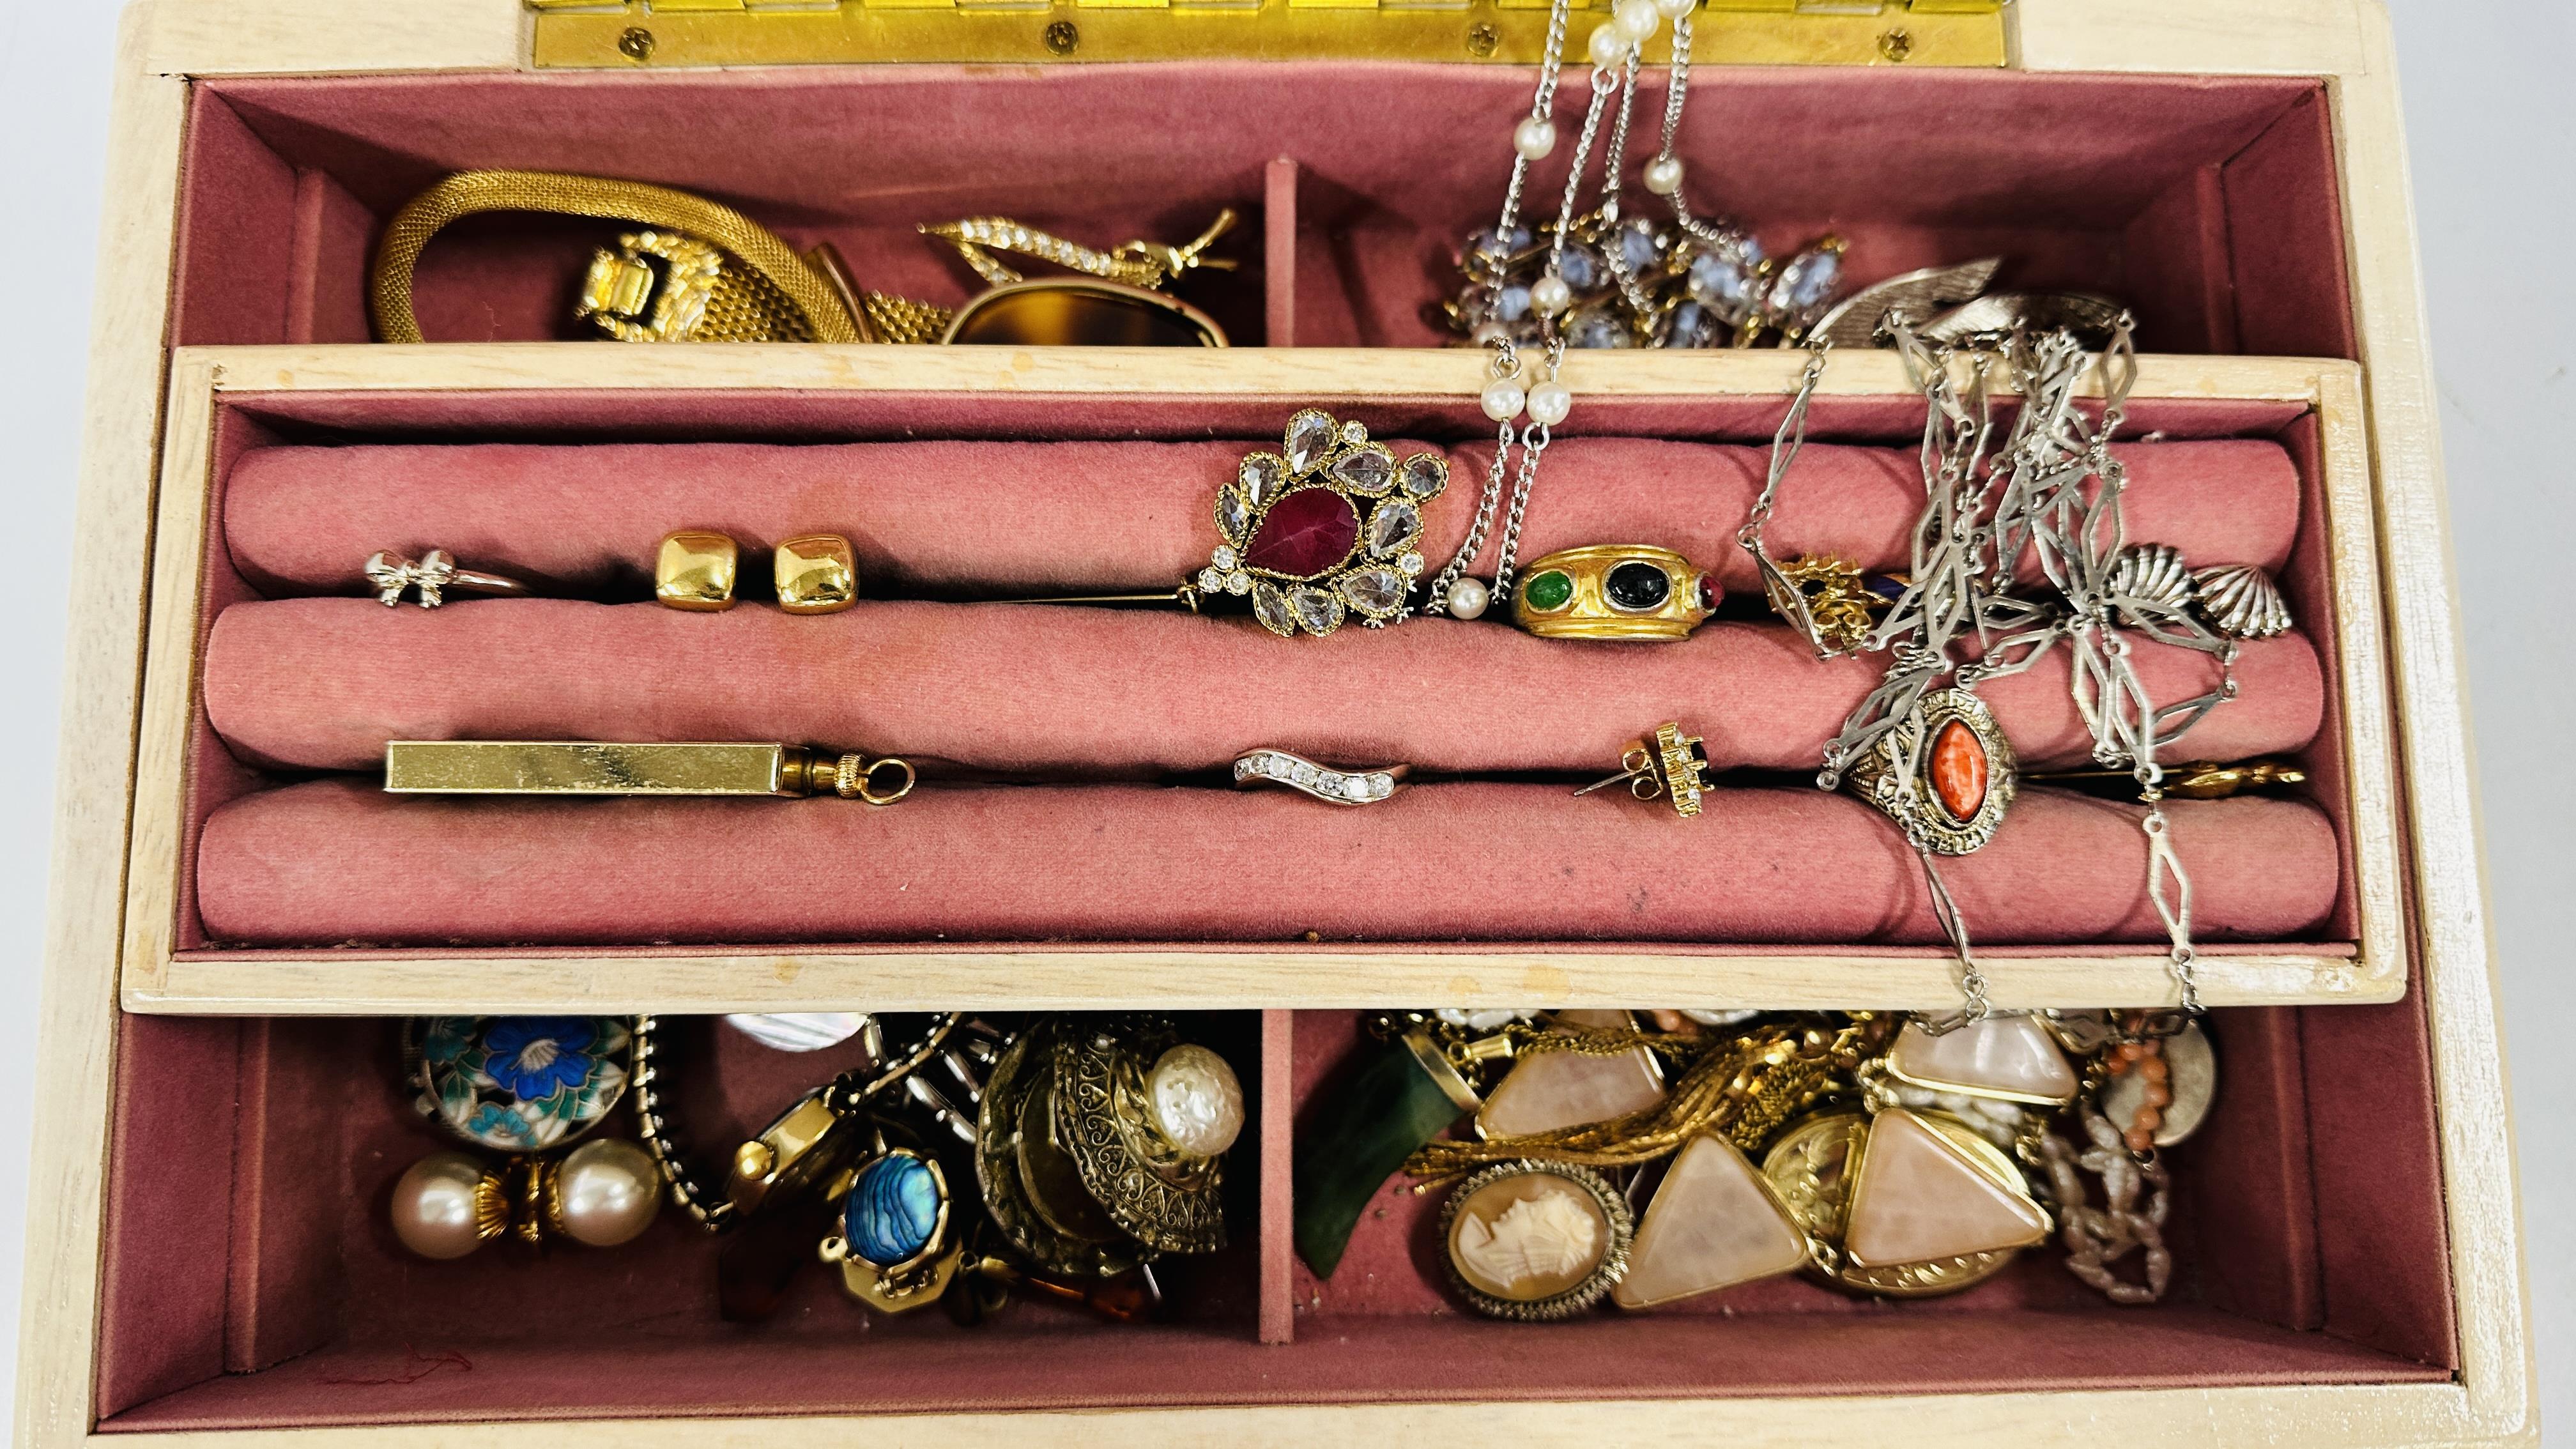 A MODERN WOODEN JEWELLERY BOX CONTAINING NECKLACES, LOCKET, STONE SET RINGS, BEADS, EARRINGS, - Image 2 of 5